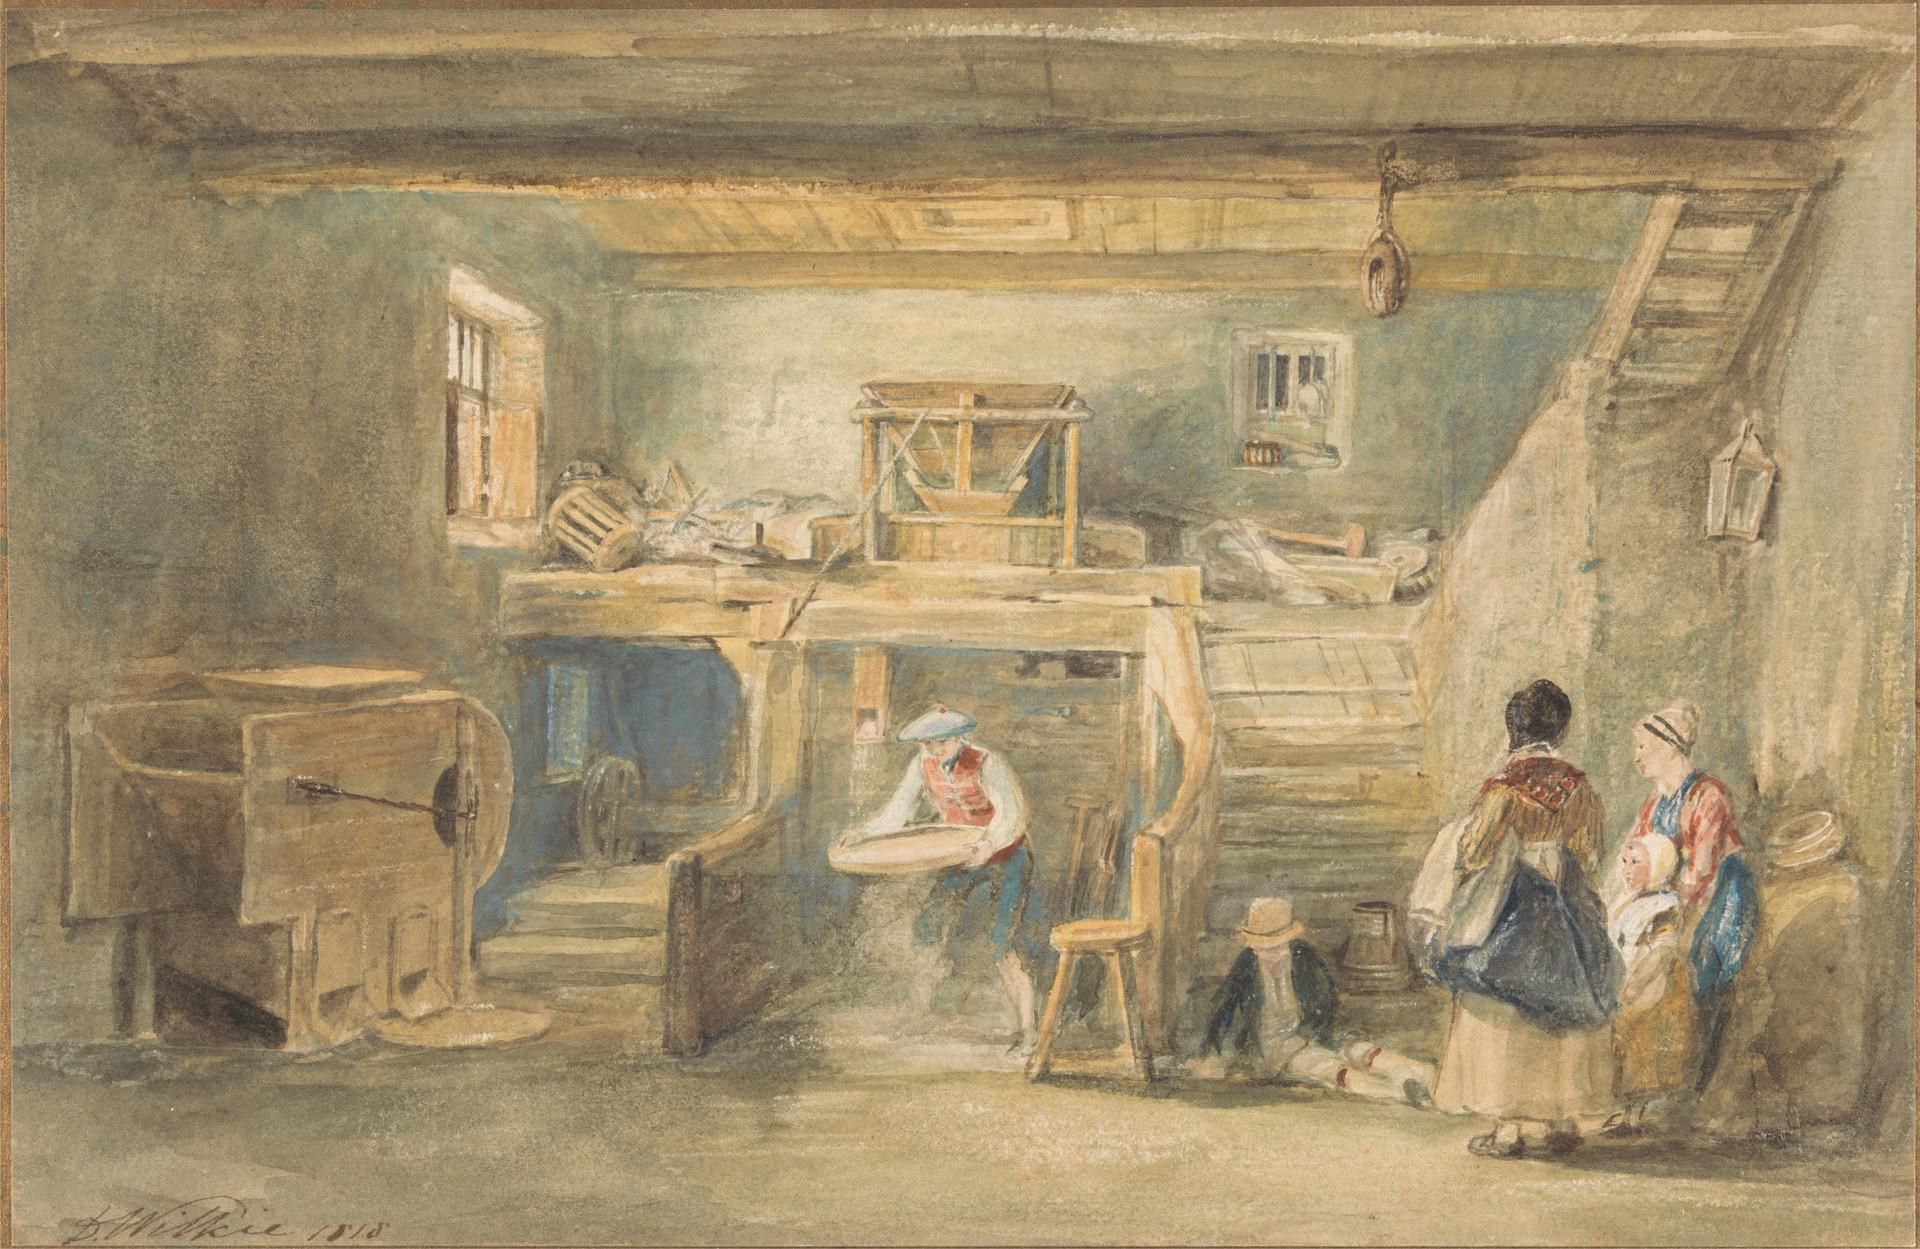 The Interior of Pitlessie Mill with a Man Sieving Corn